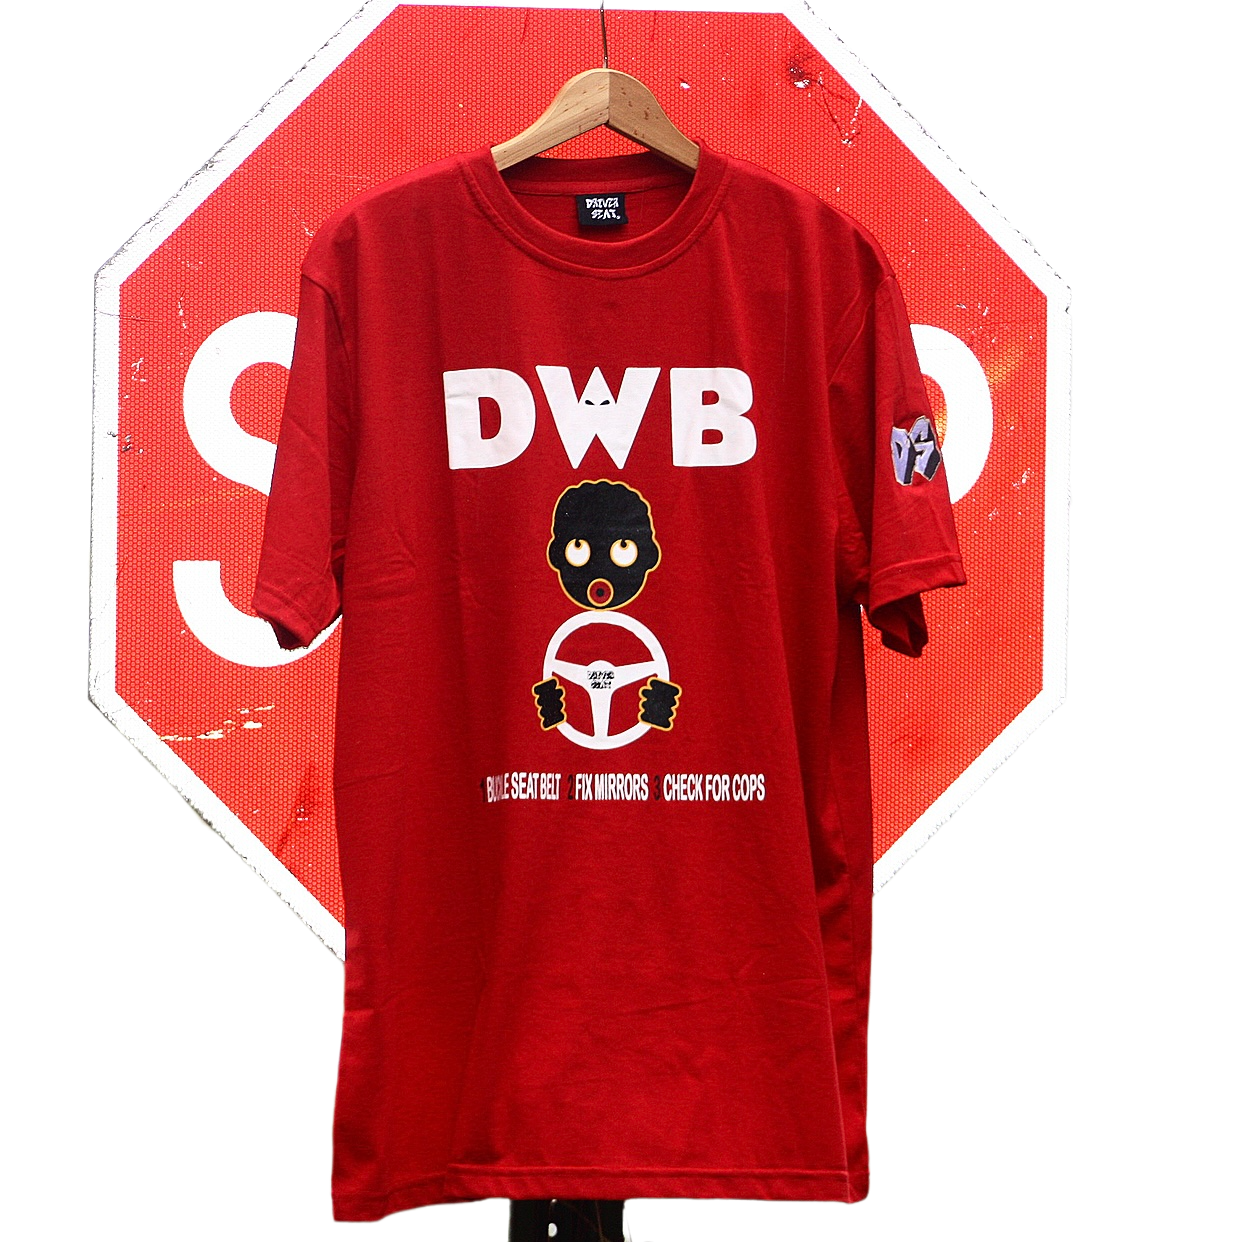 DWB Tee - Red